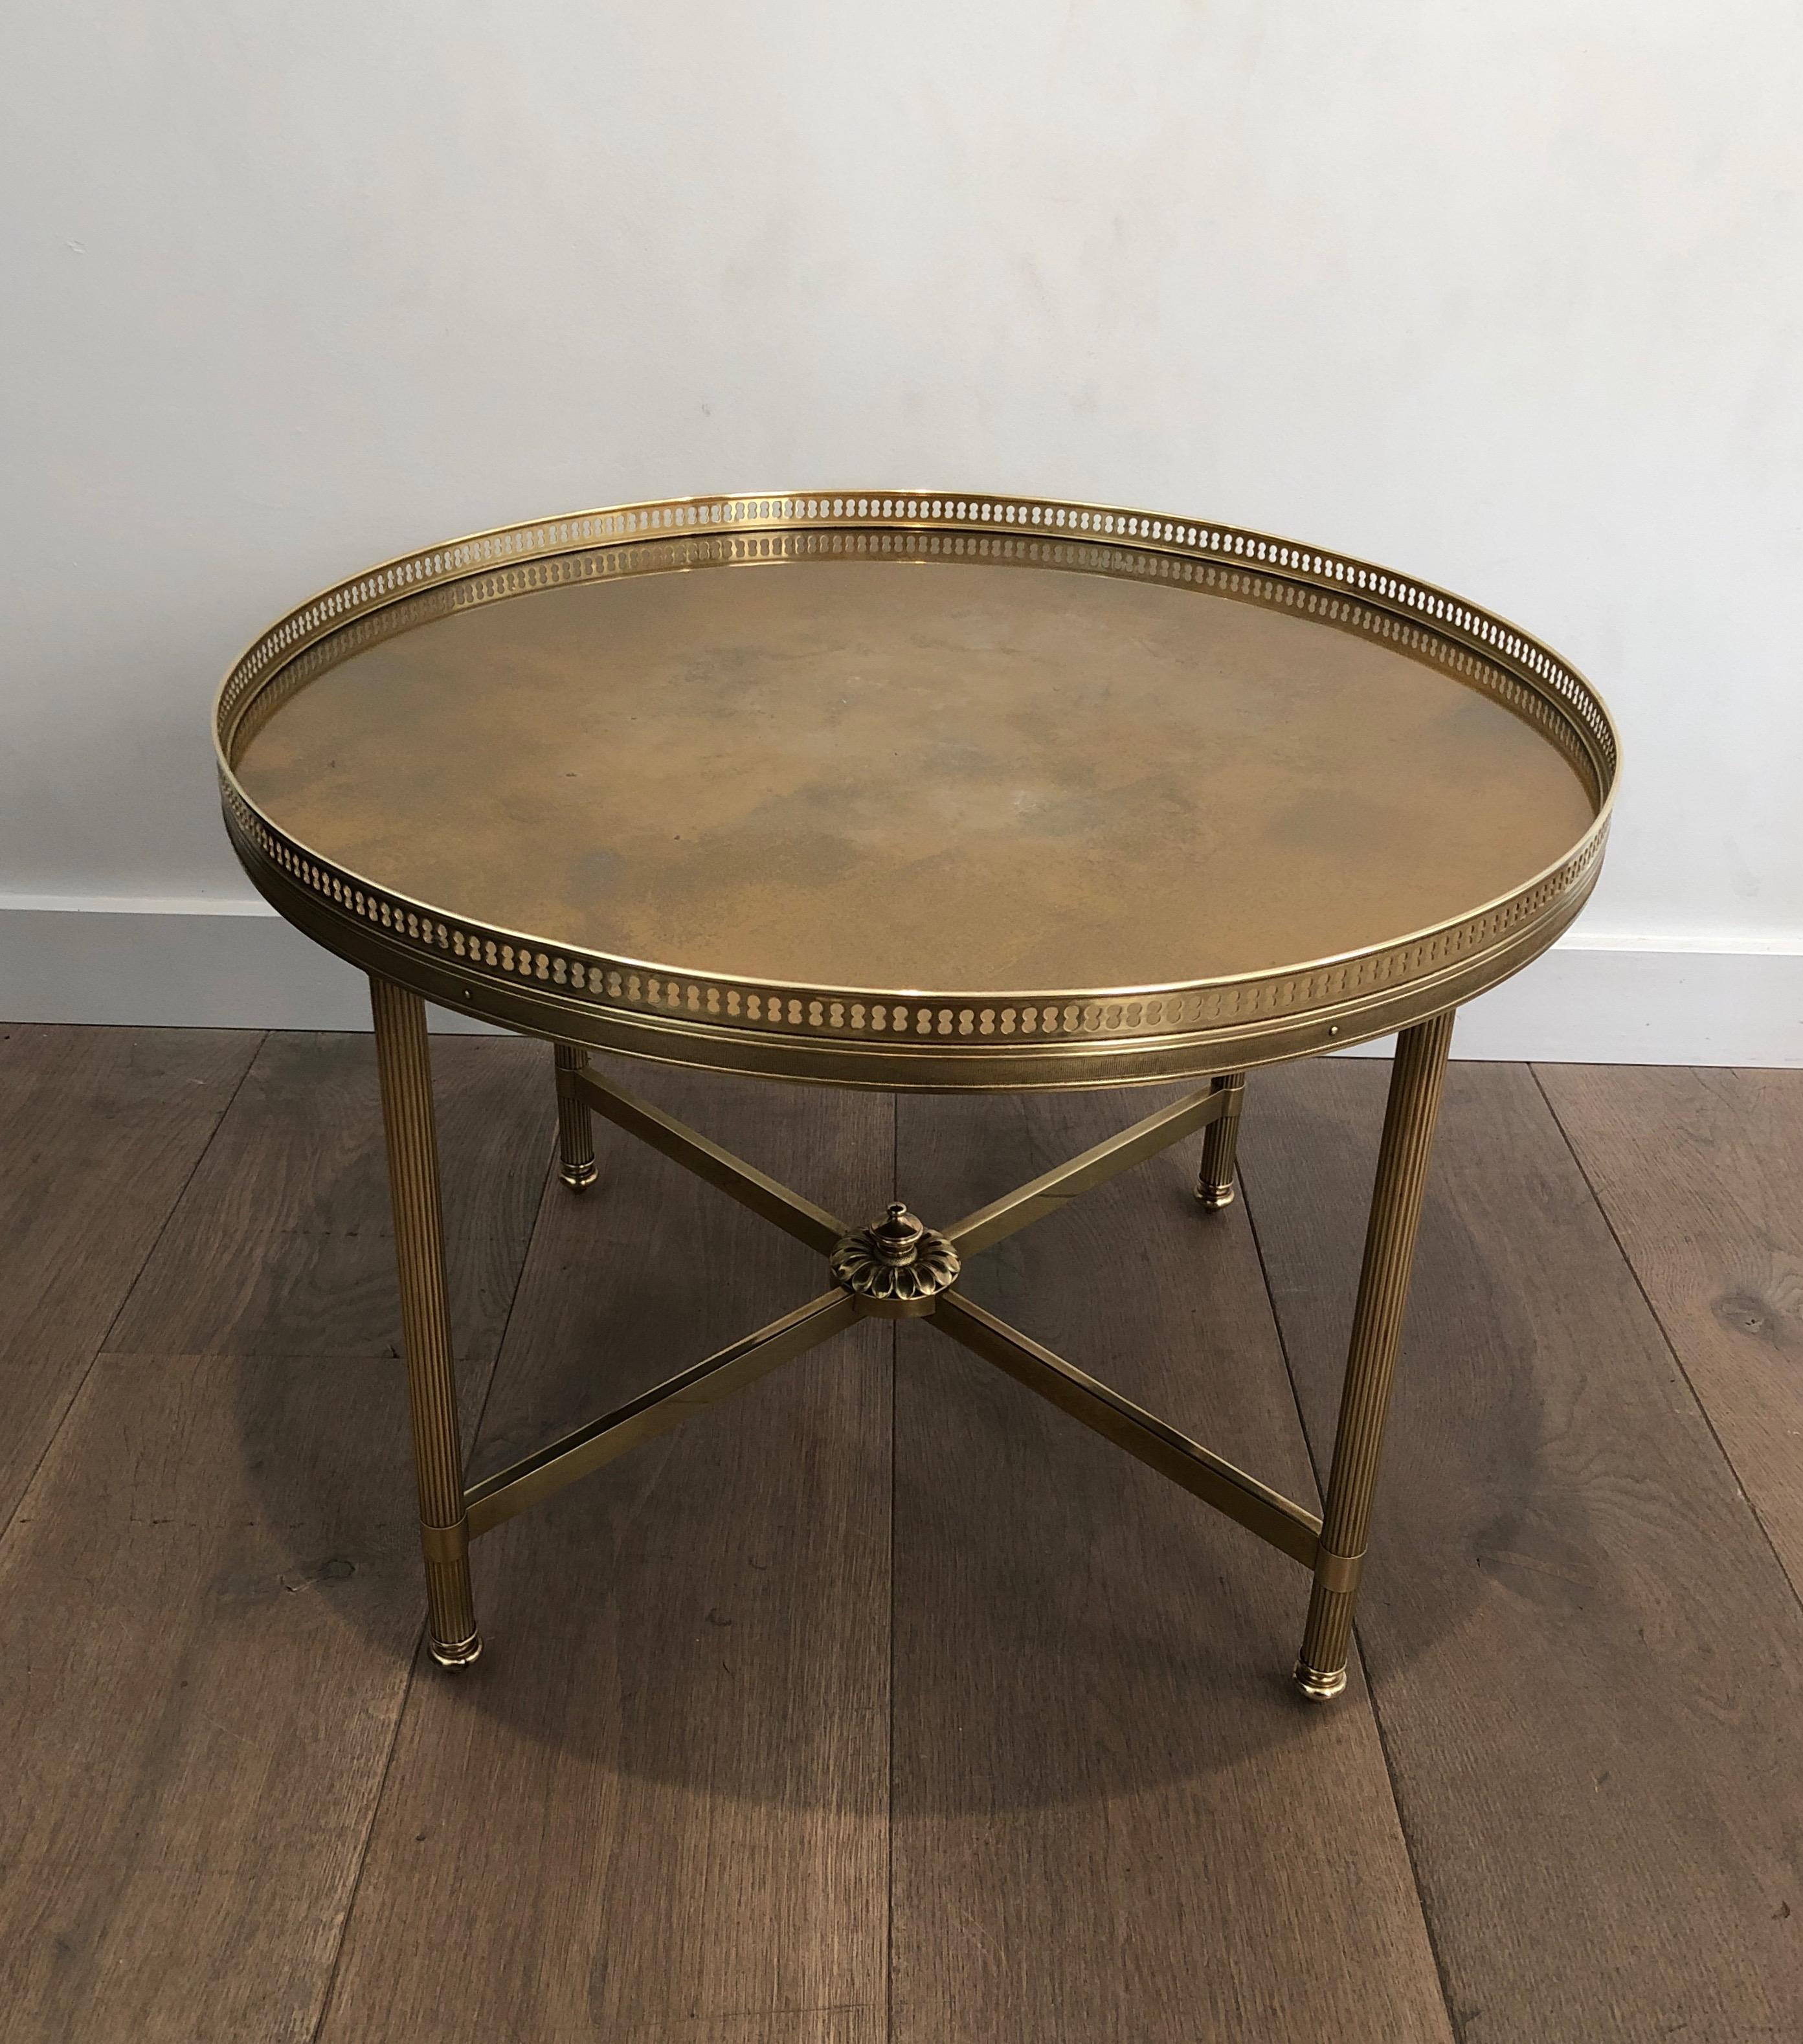 This neoclassical style small round coffee table is made of brass with gold shelf on top. This is a work by famous French designer Maison Jansen, circa 1940.